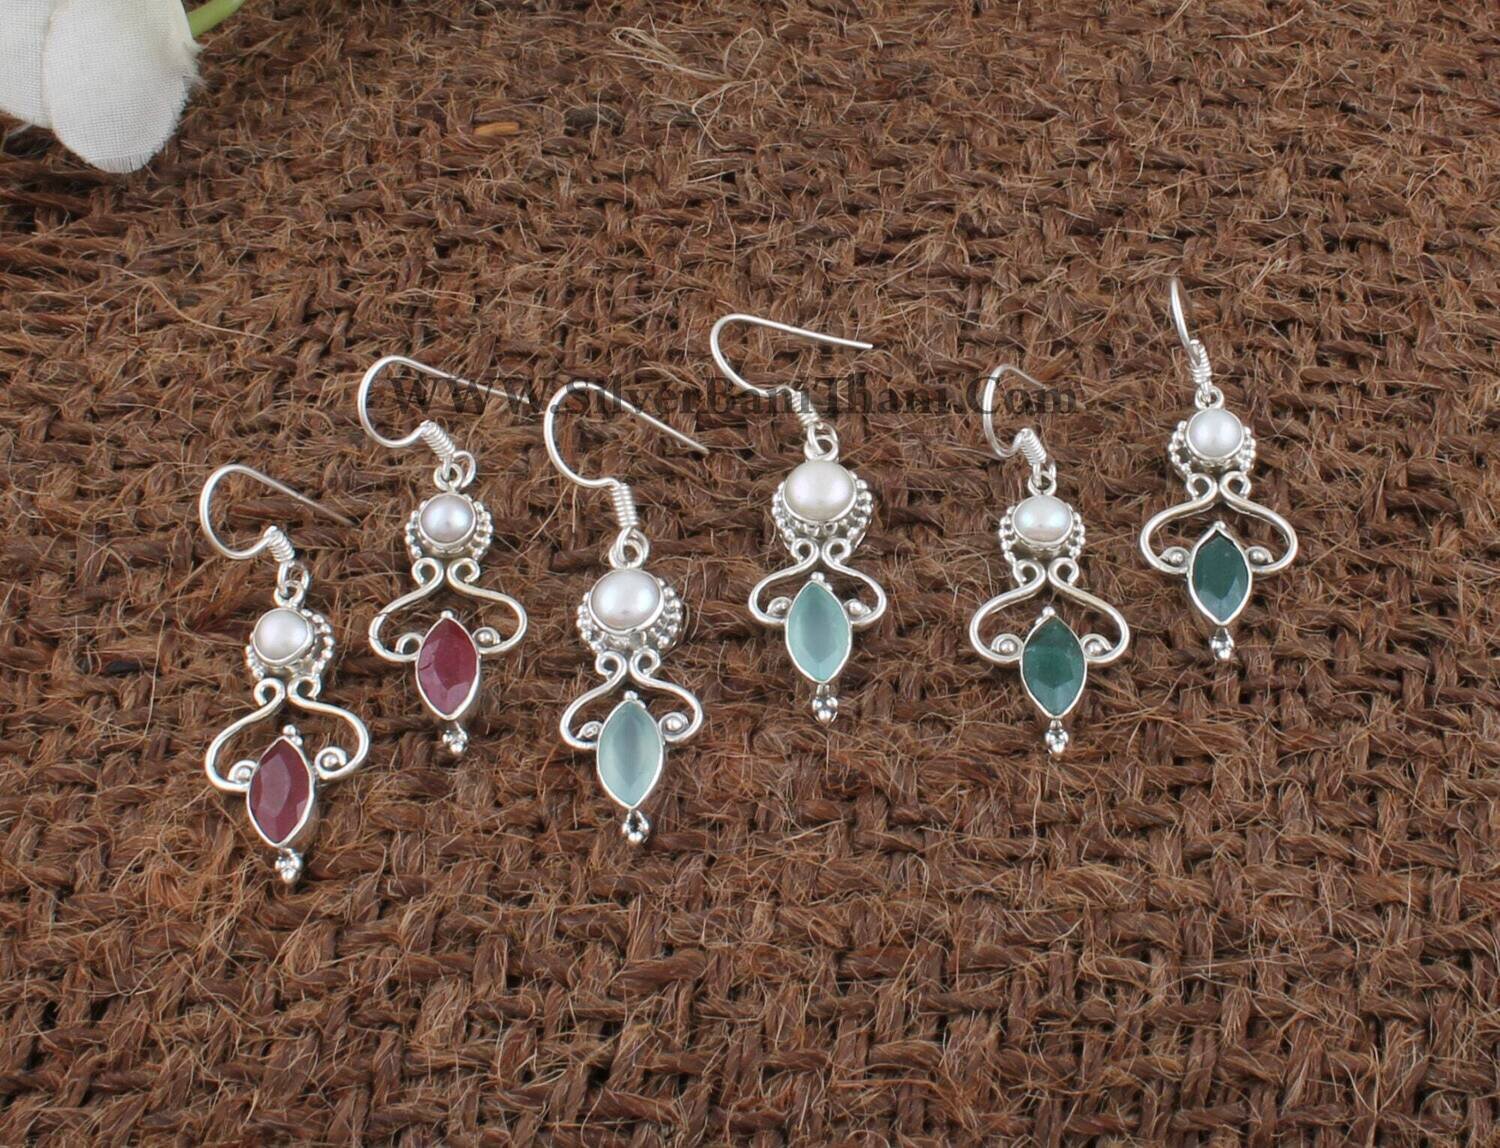 Multi Gemstone Silver Earrings | 925 Sterling Silver Designer Two Gemstone Earrings | Personalized Gift | Present For Her | Bridesmaid Gifts